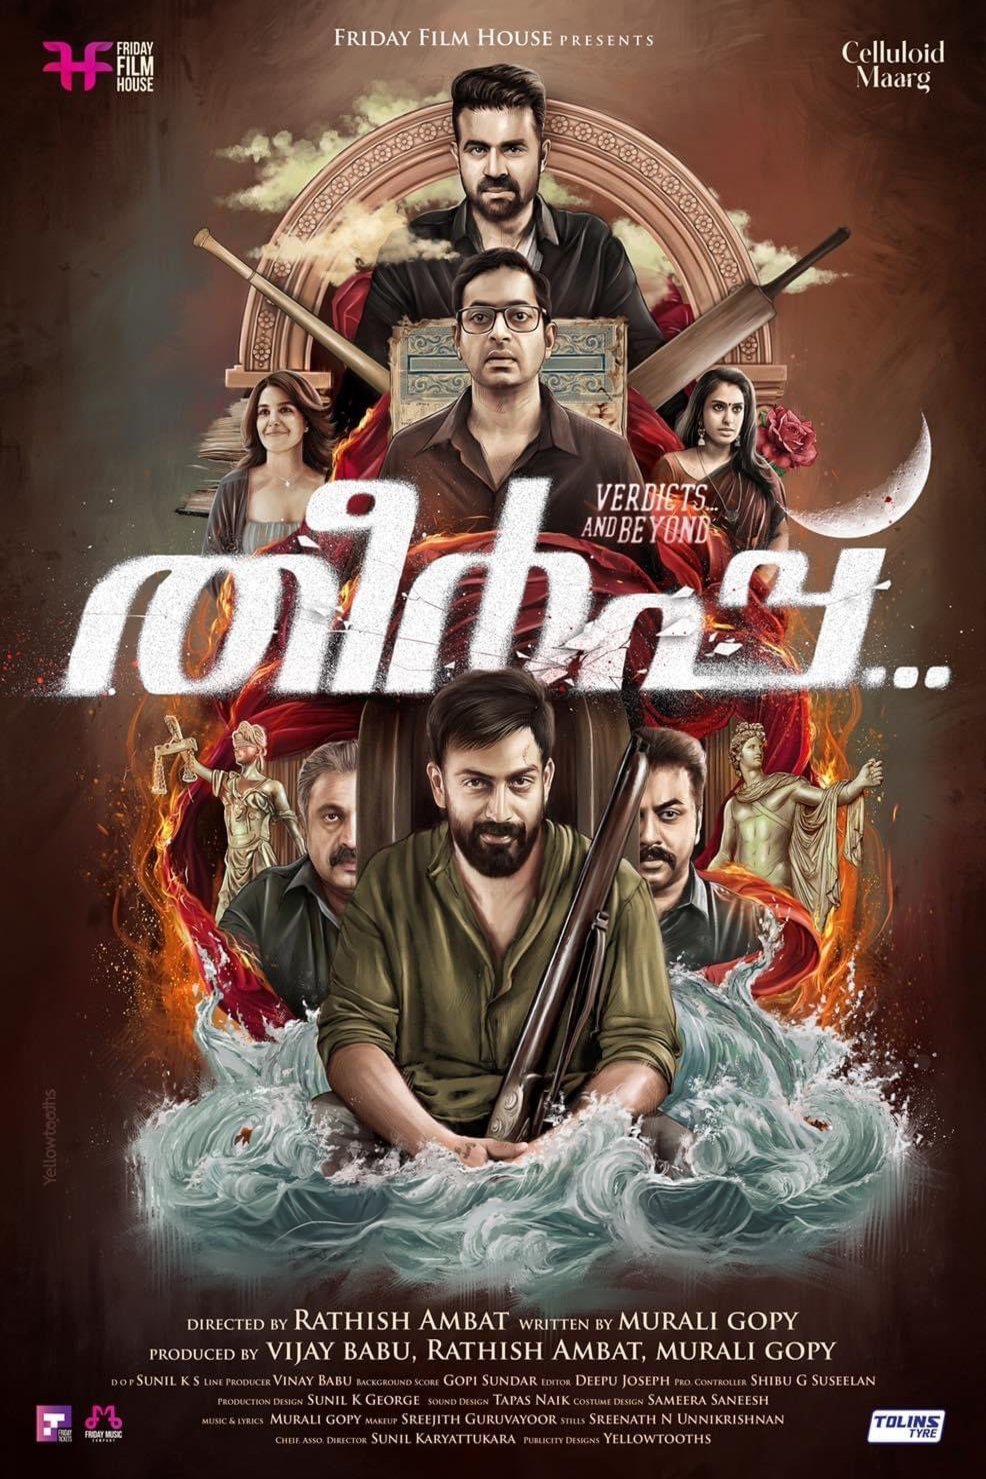 Malayalam poster of the movie Theerppu